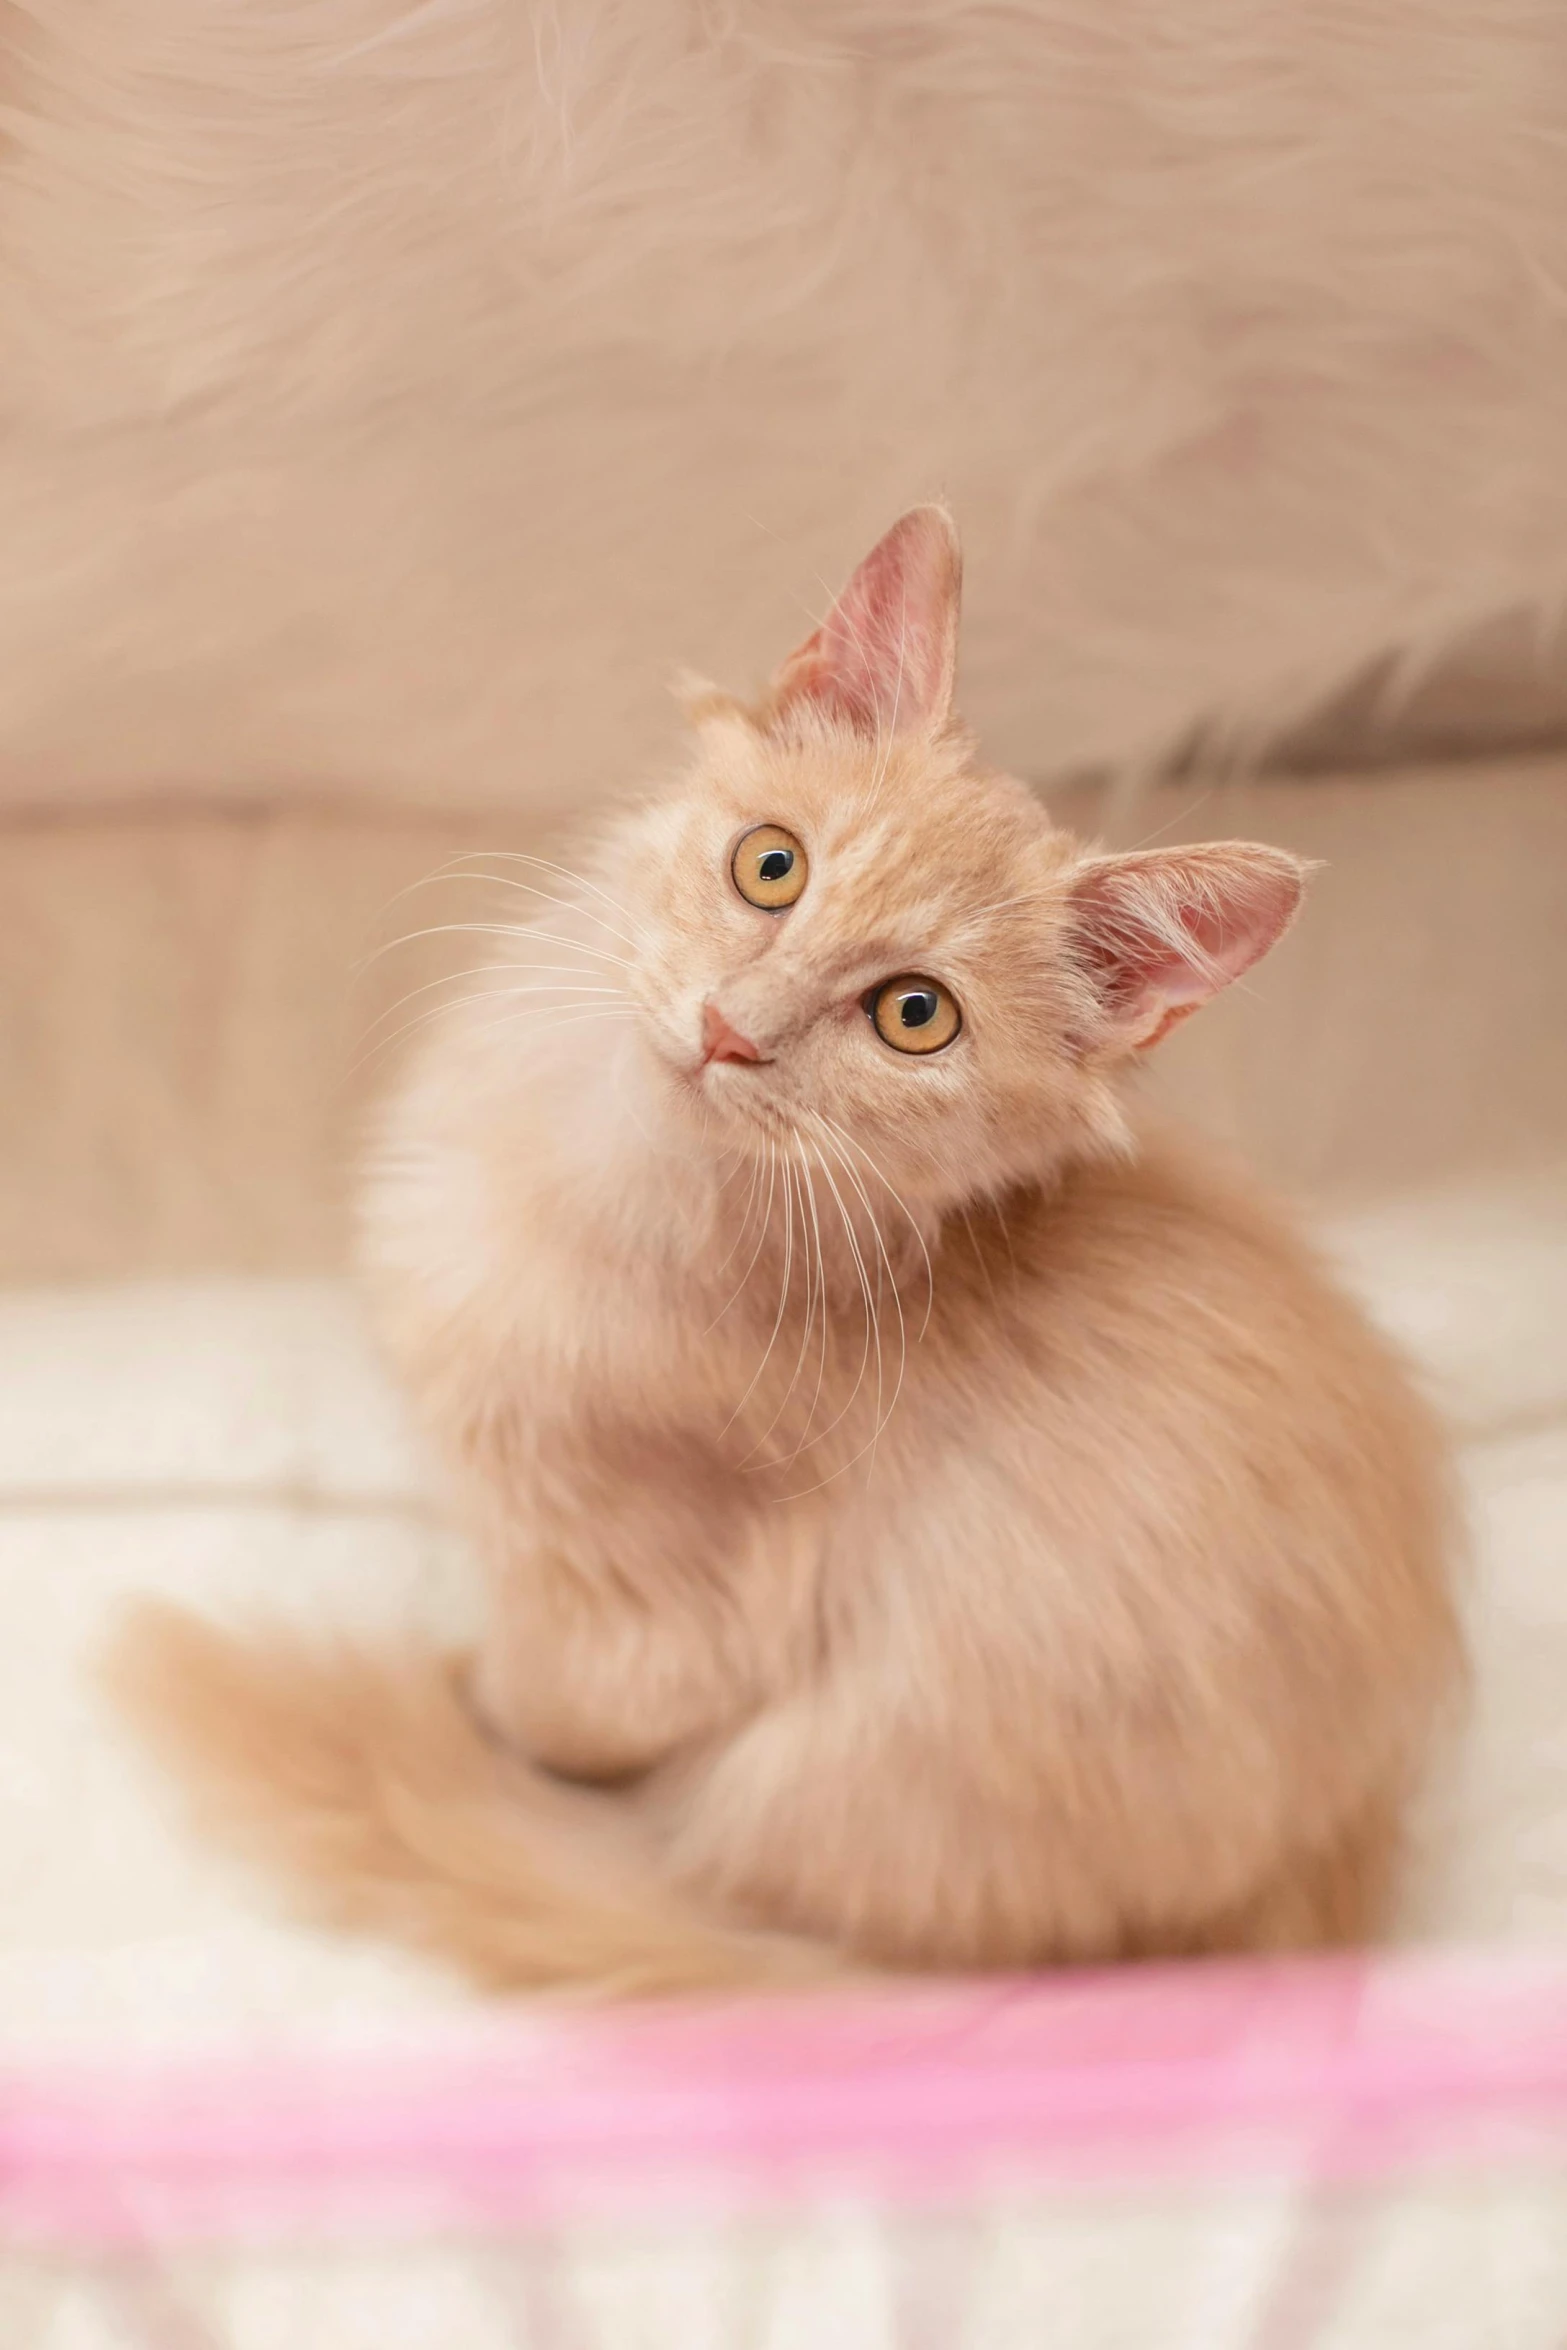 a small orange kitten sitting on top of a bed, pale pointed ears, doing a majestic pose, jen atkin, high quality upload